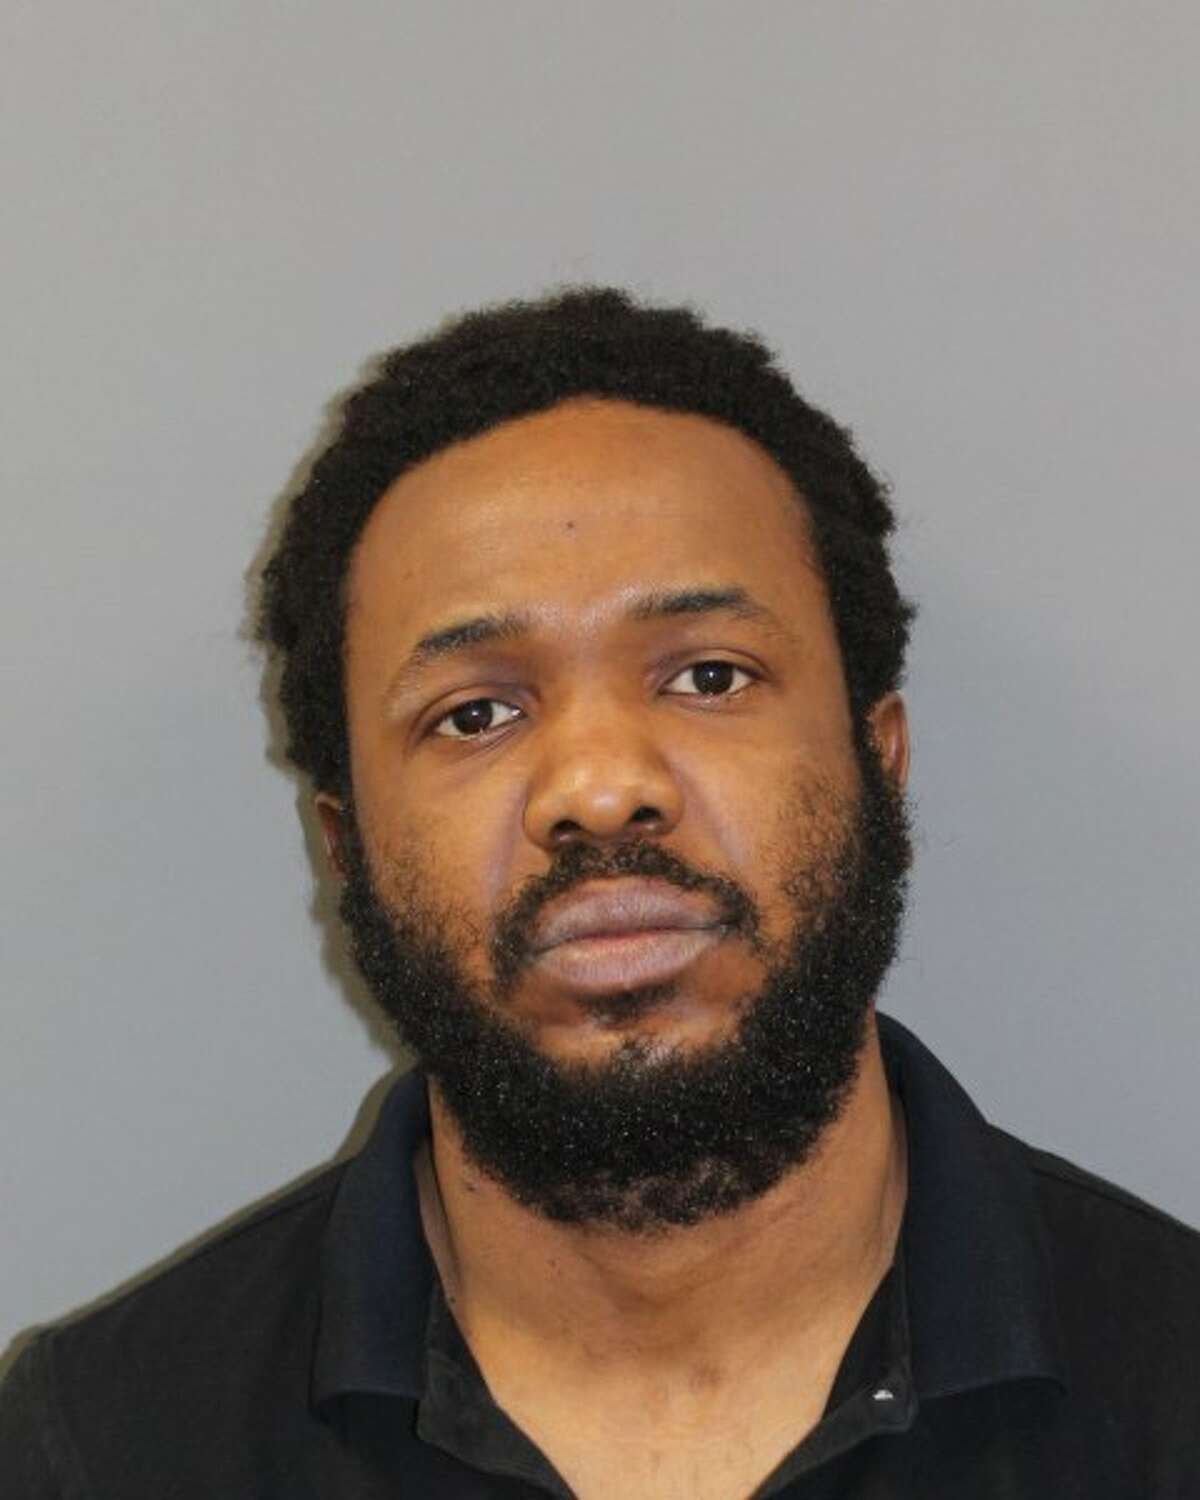 Damion Davis, 35, of Hartford, repeatedly stabbed a 23-year-old woman he was likely stalking after breaking into an Oakland Street home Thursday night, according to Manchester police.